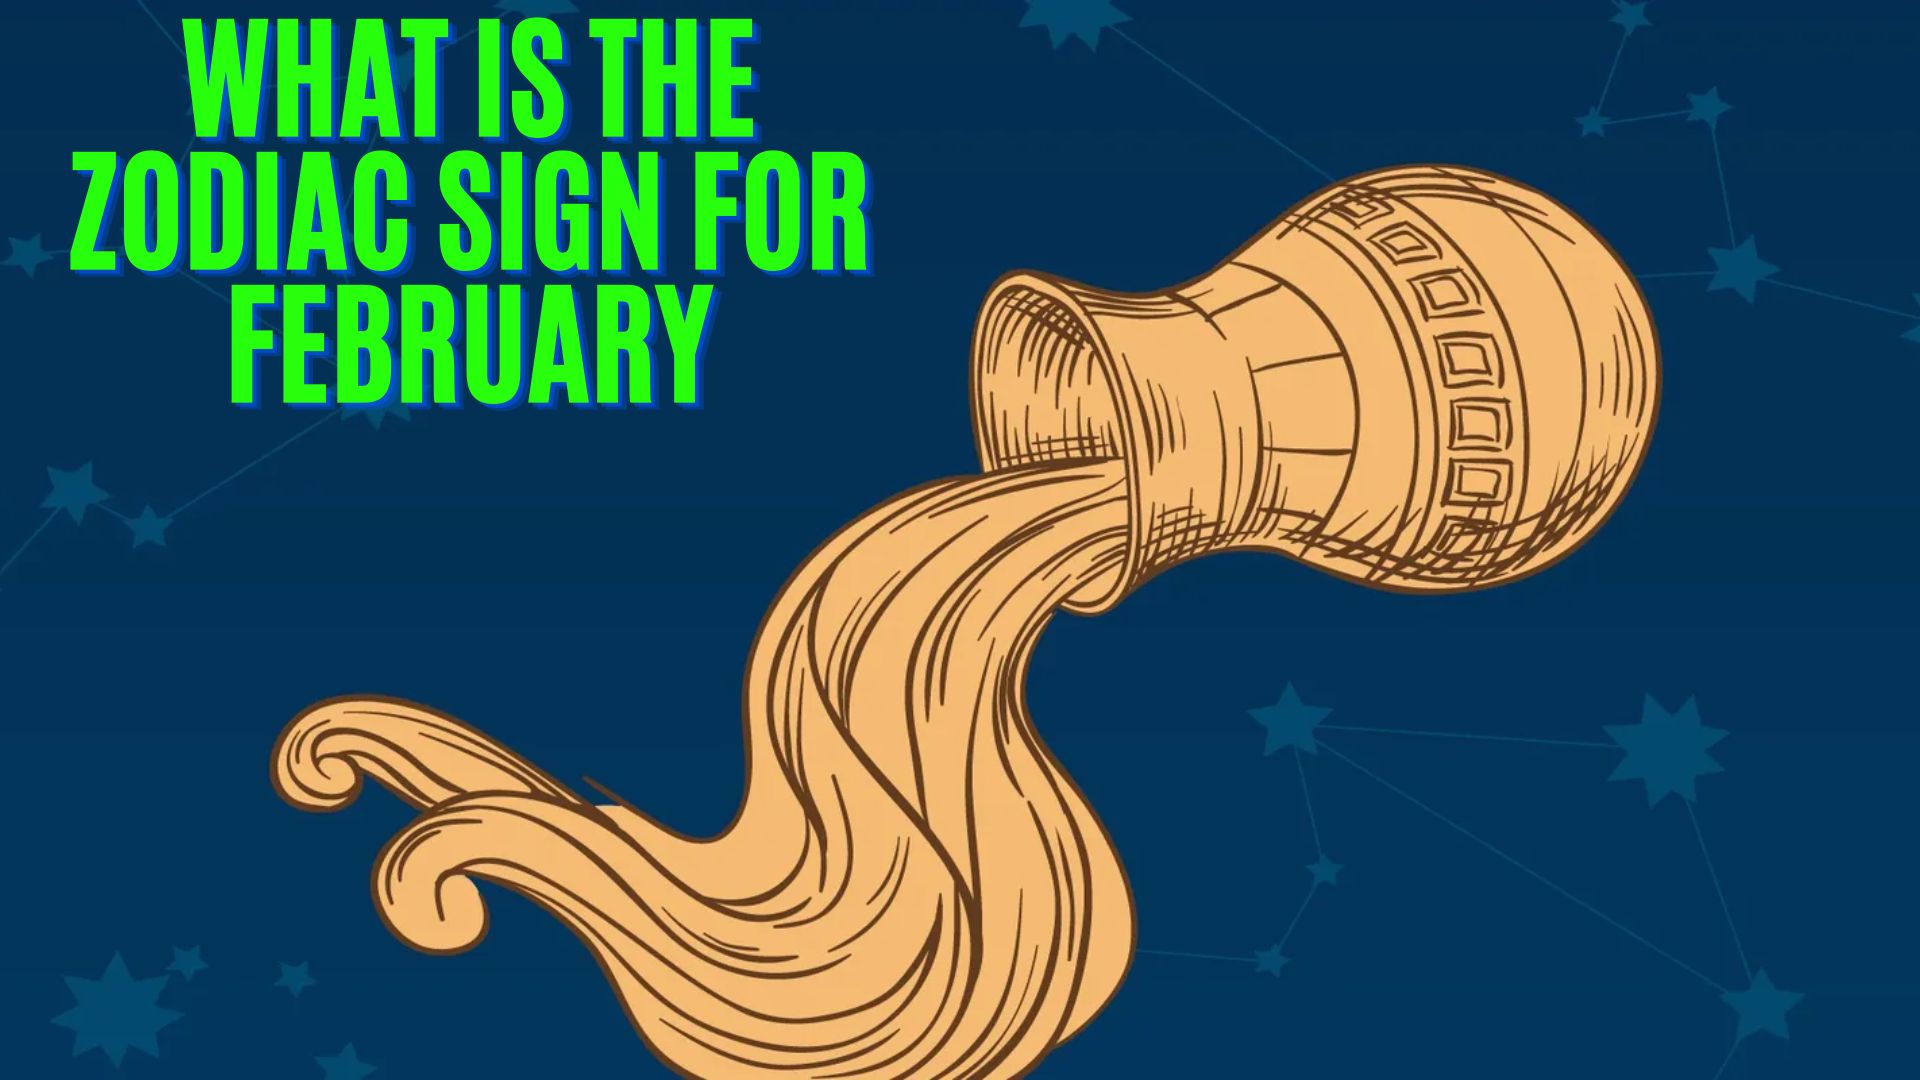 What Is The Zodiac Sign For February?